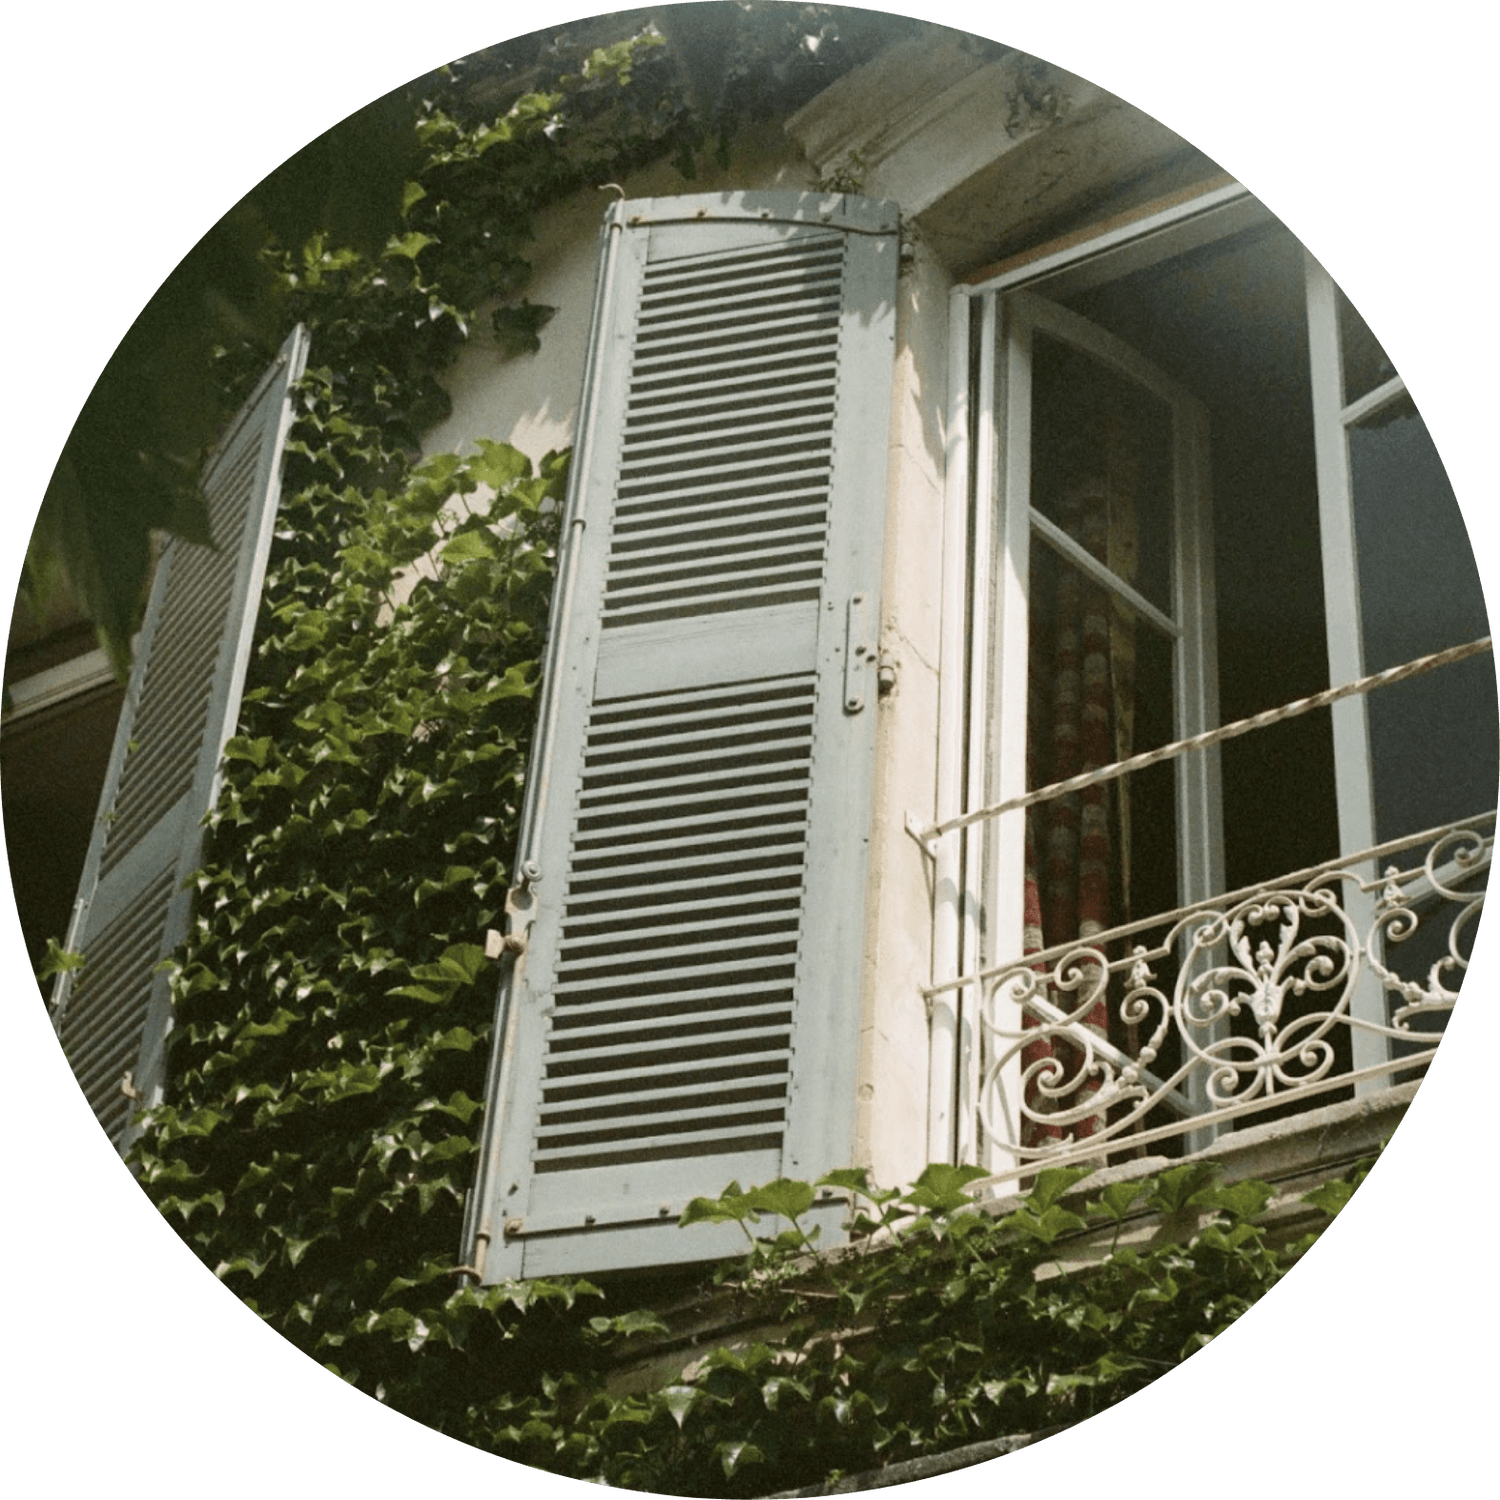 Window shutter at bed and breakfast in France